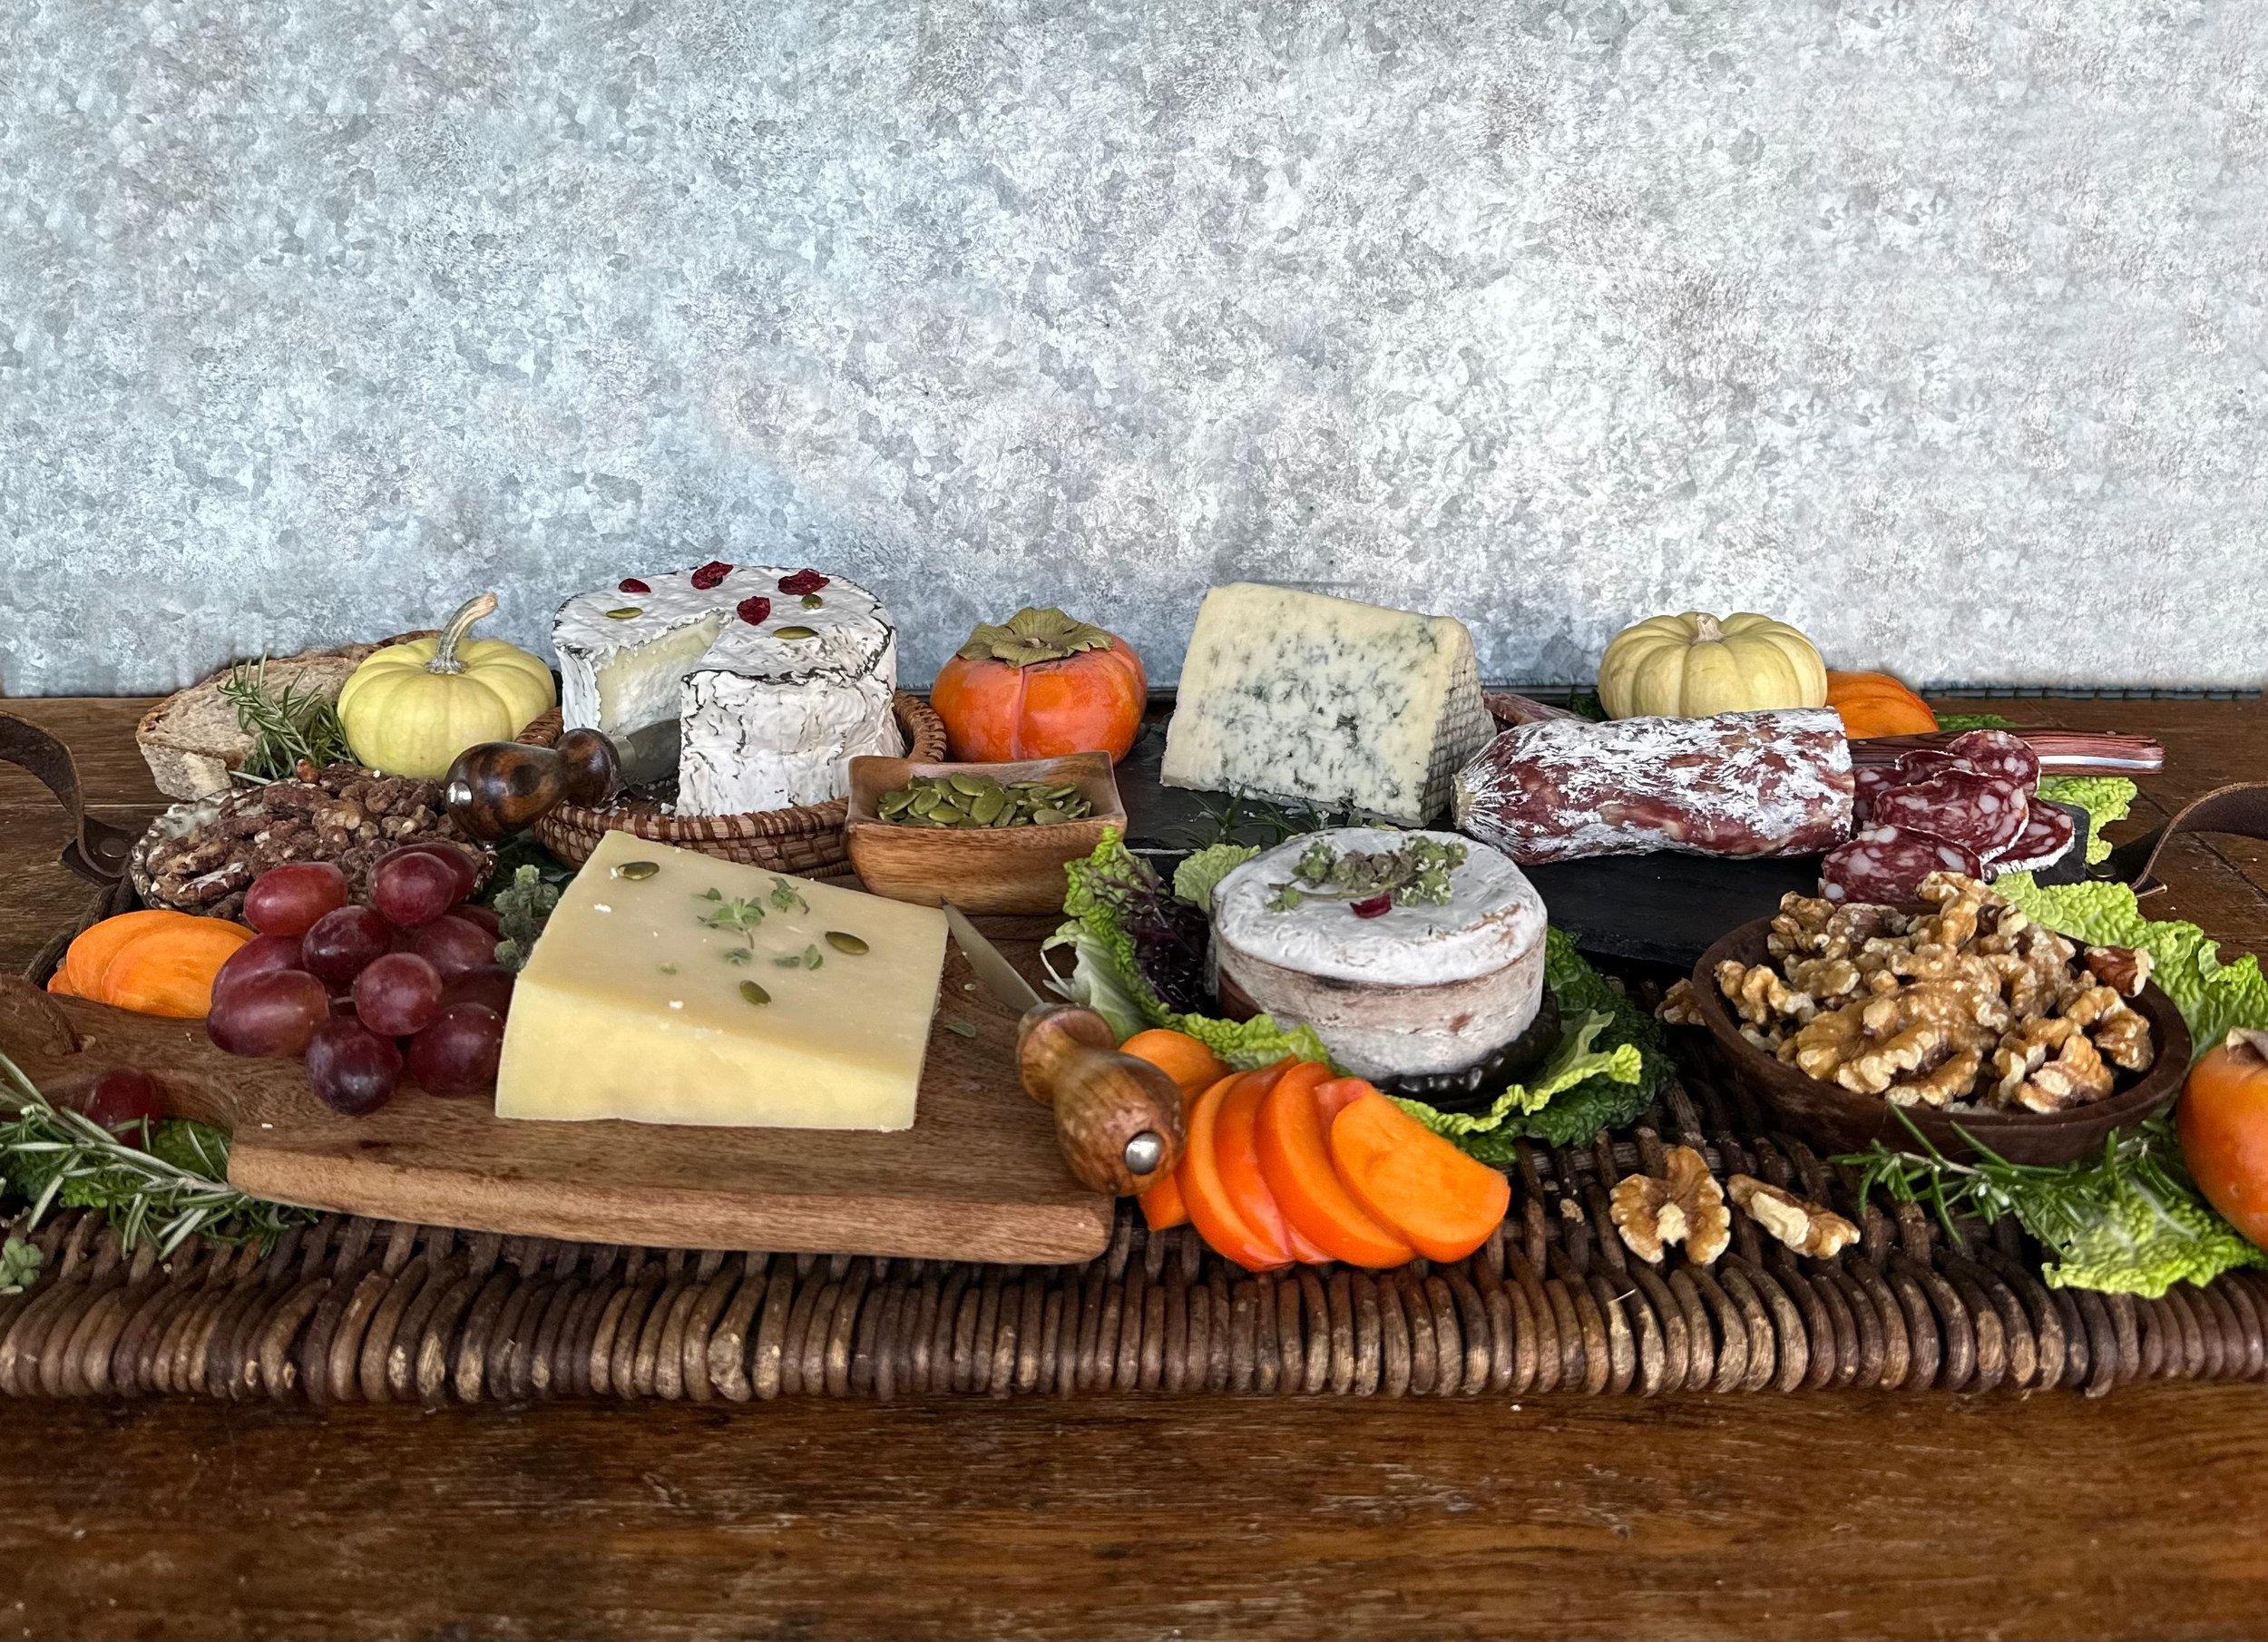 How to Make a Cheeseboard - Girl Gone Gourmet